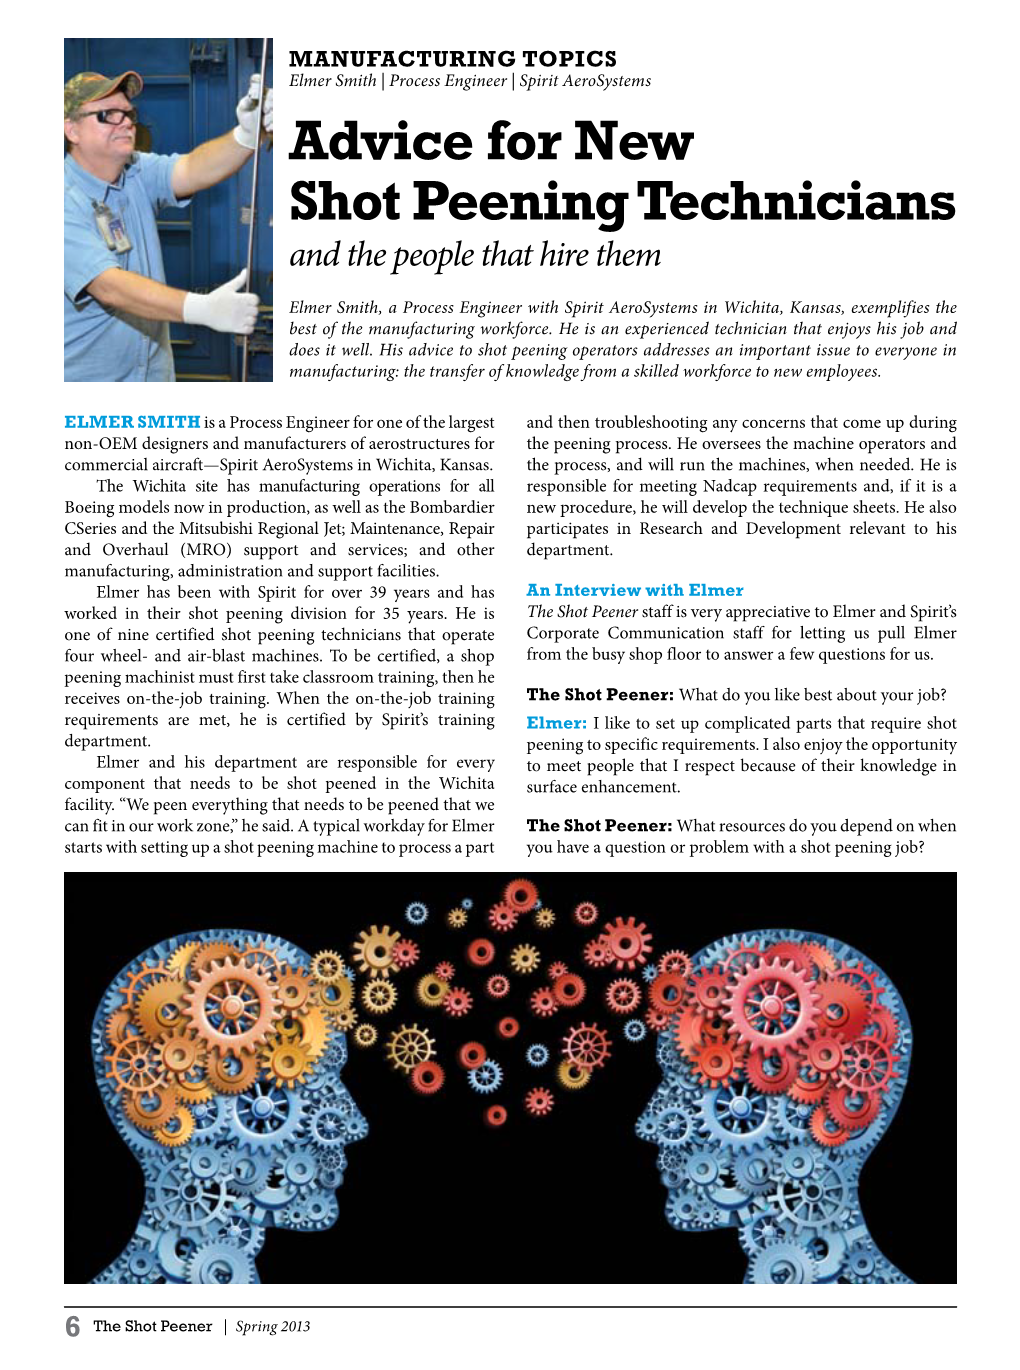 Advice for New Shot Peening Technicians and the People That Hire Them